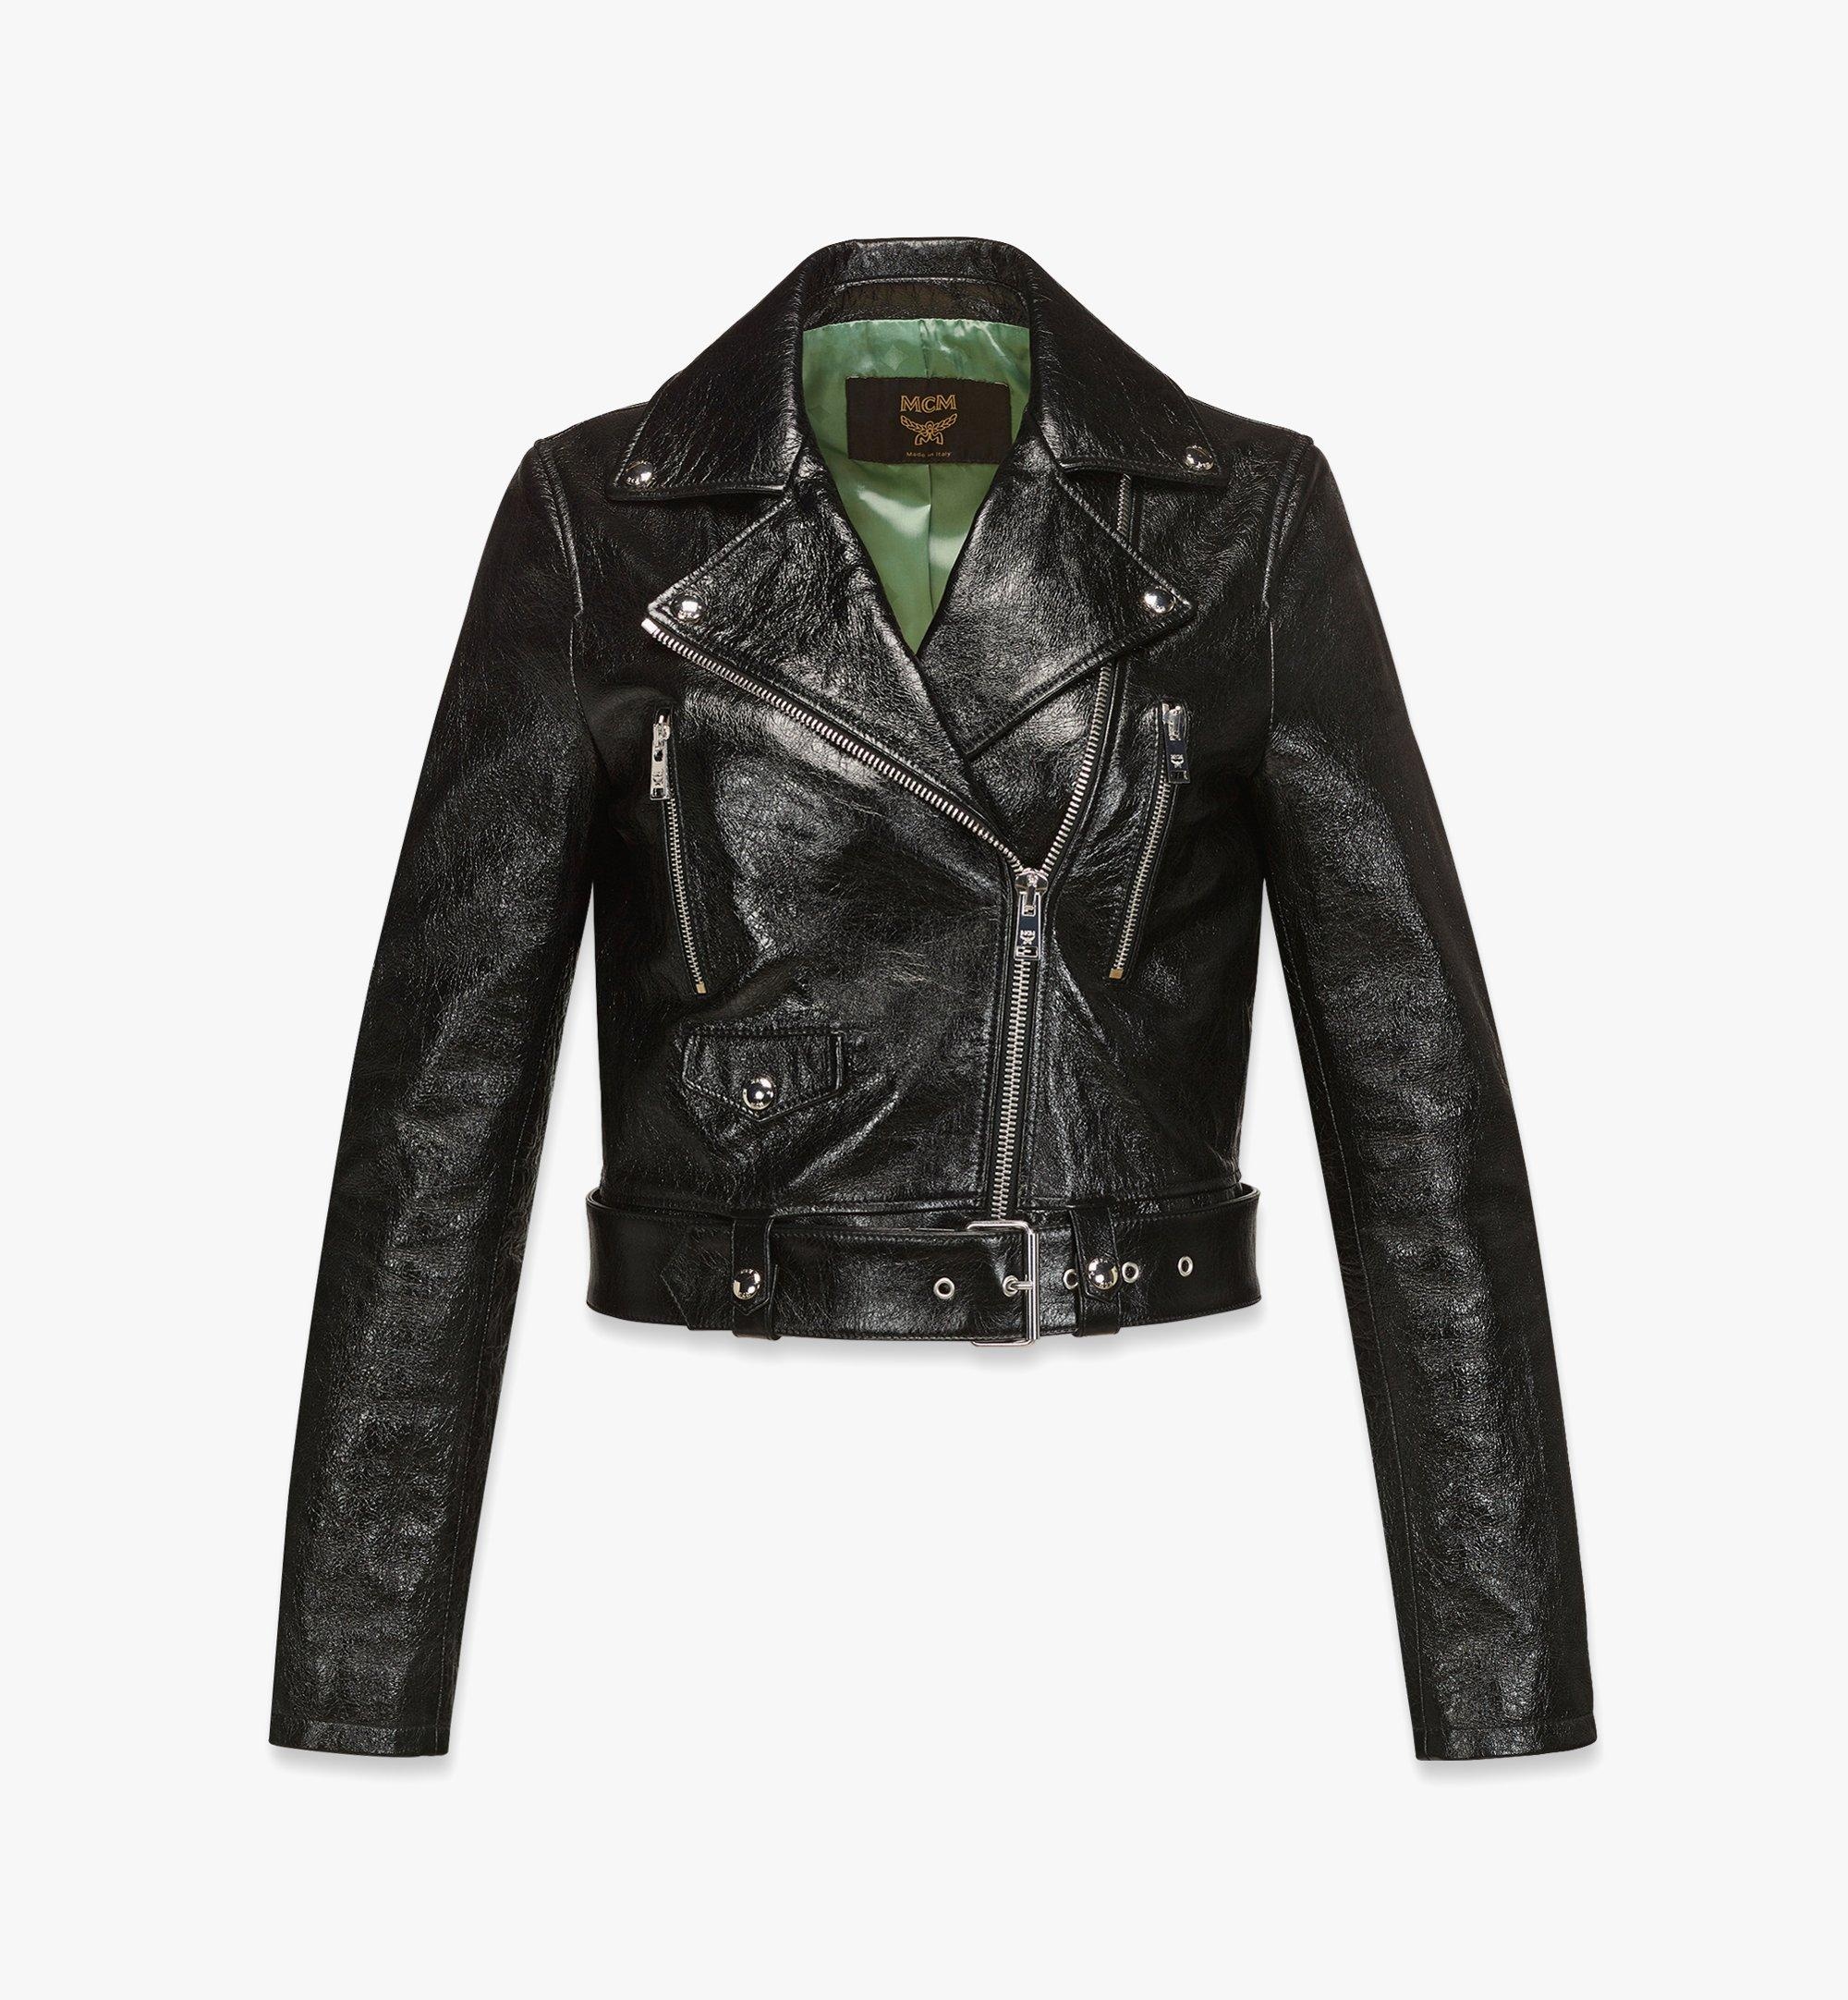 MCMotor Cropped Biker Jacket in Lamb Leather - 1